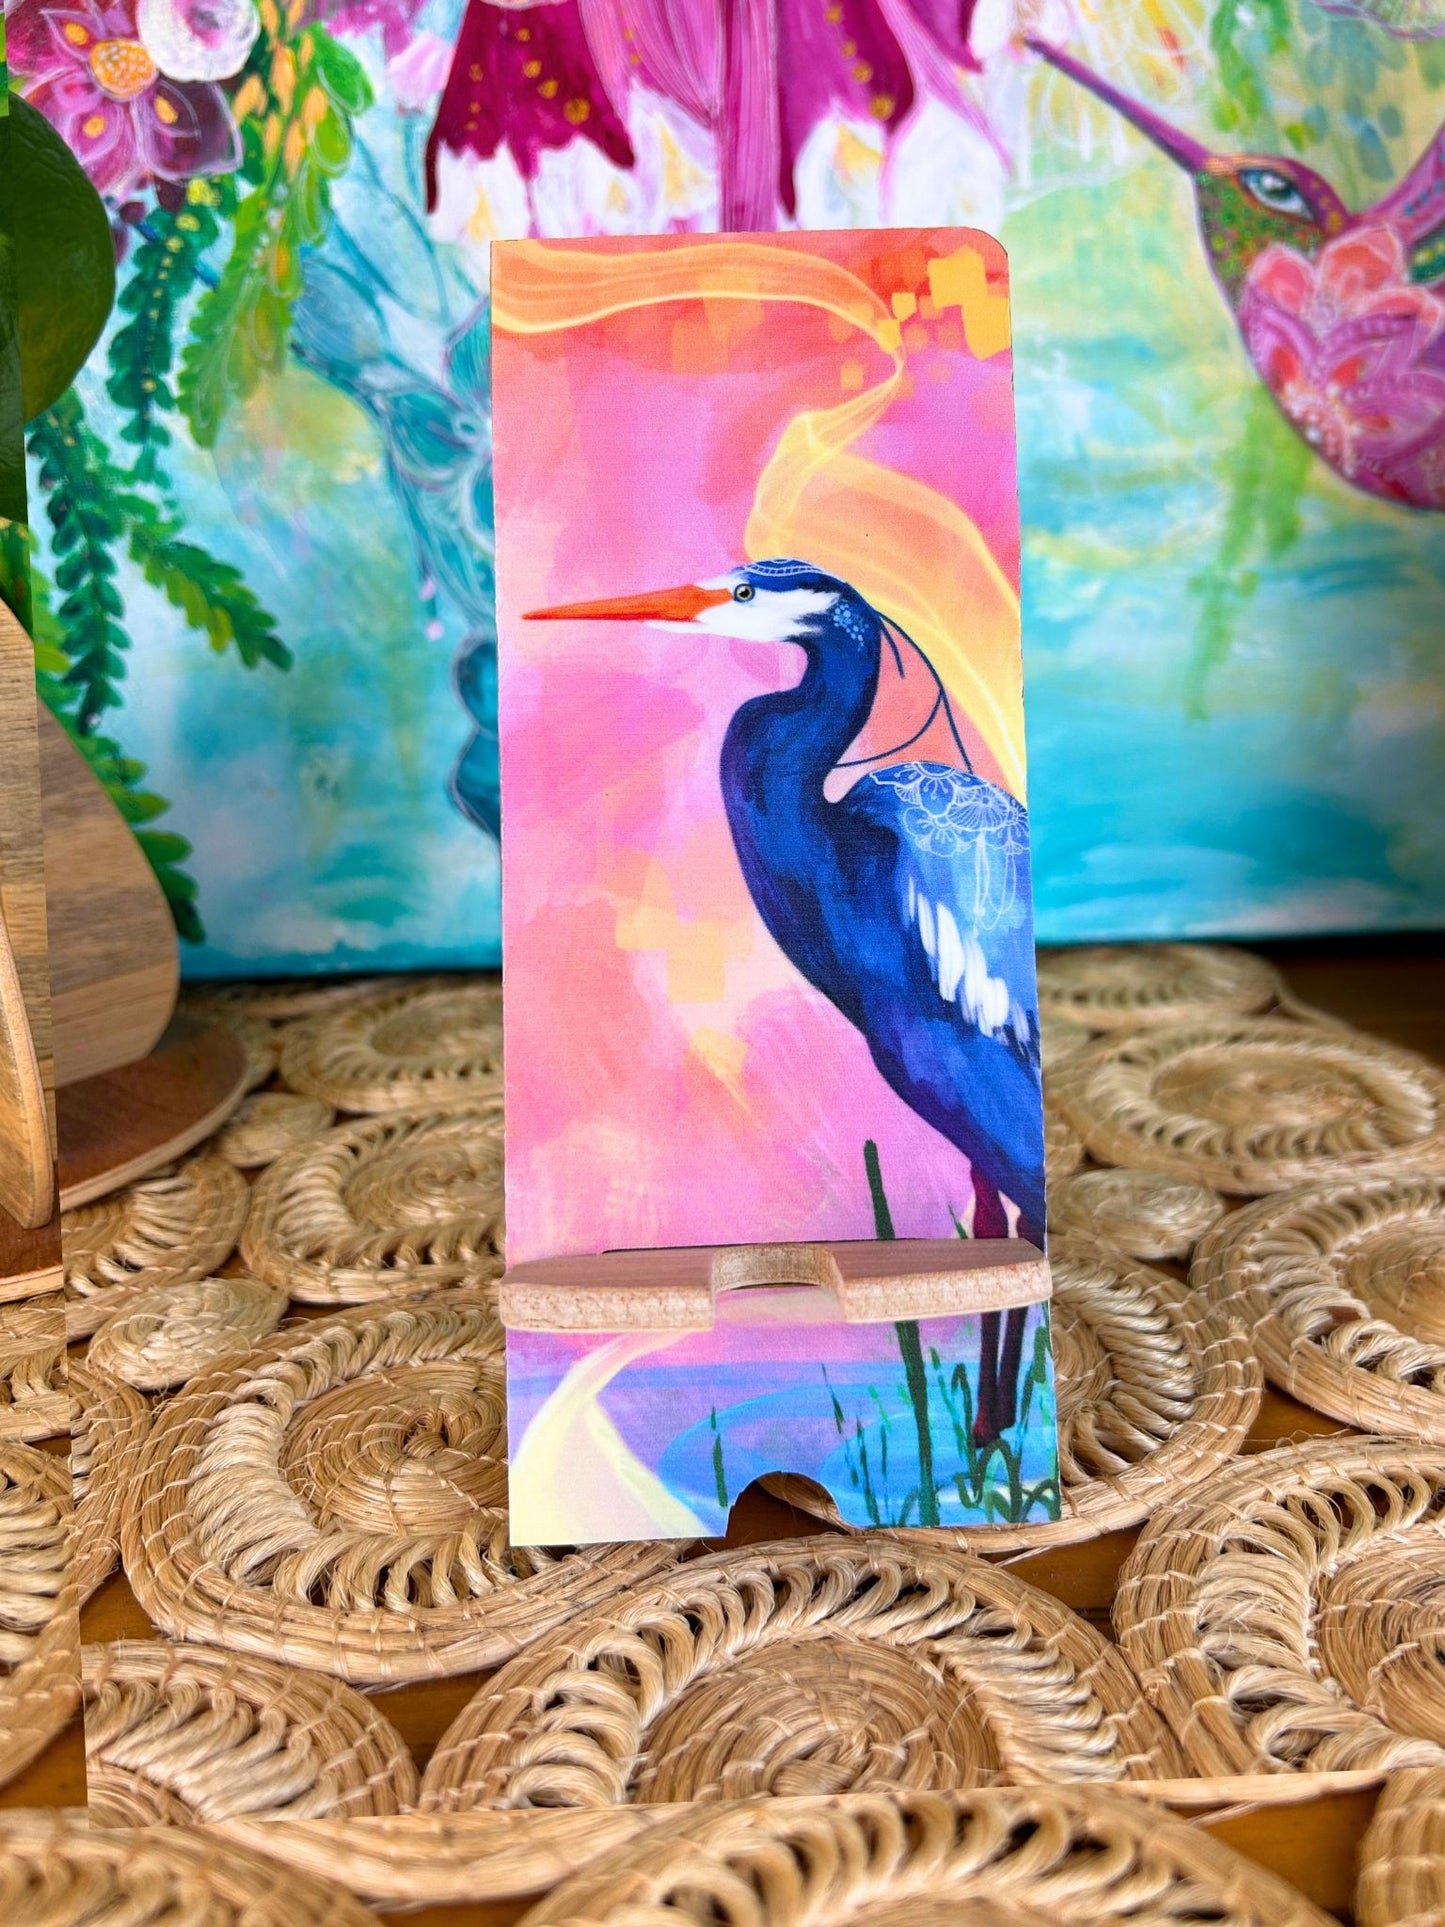 Heron - UV print on a wooden cell phone holder (iPhone Android).